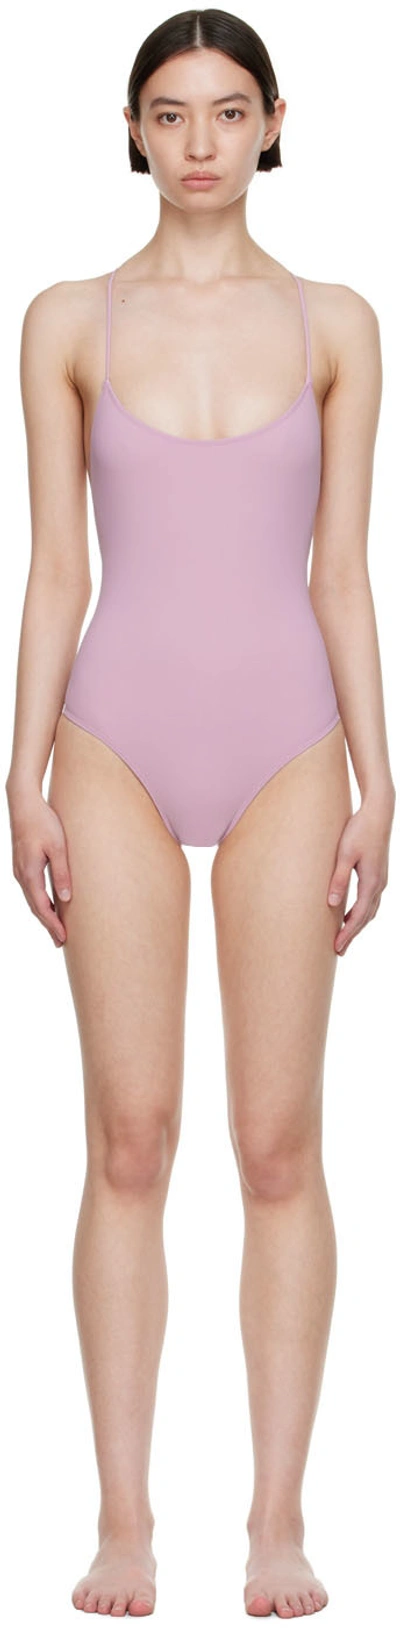 Lido Ventiquattro One Piece Swimsuit In Pink